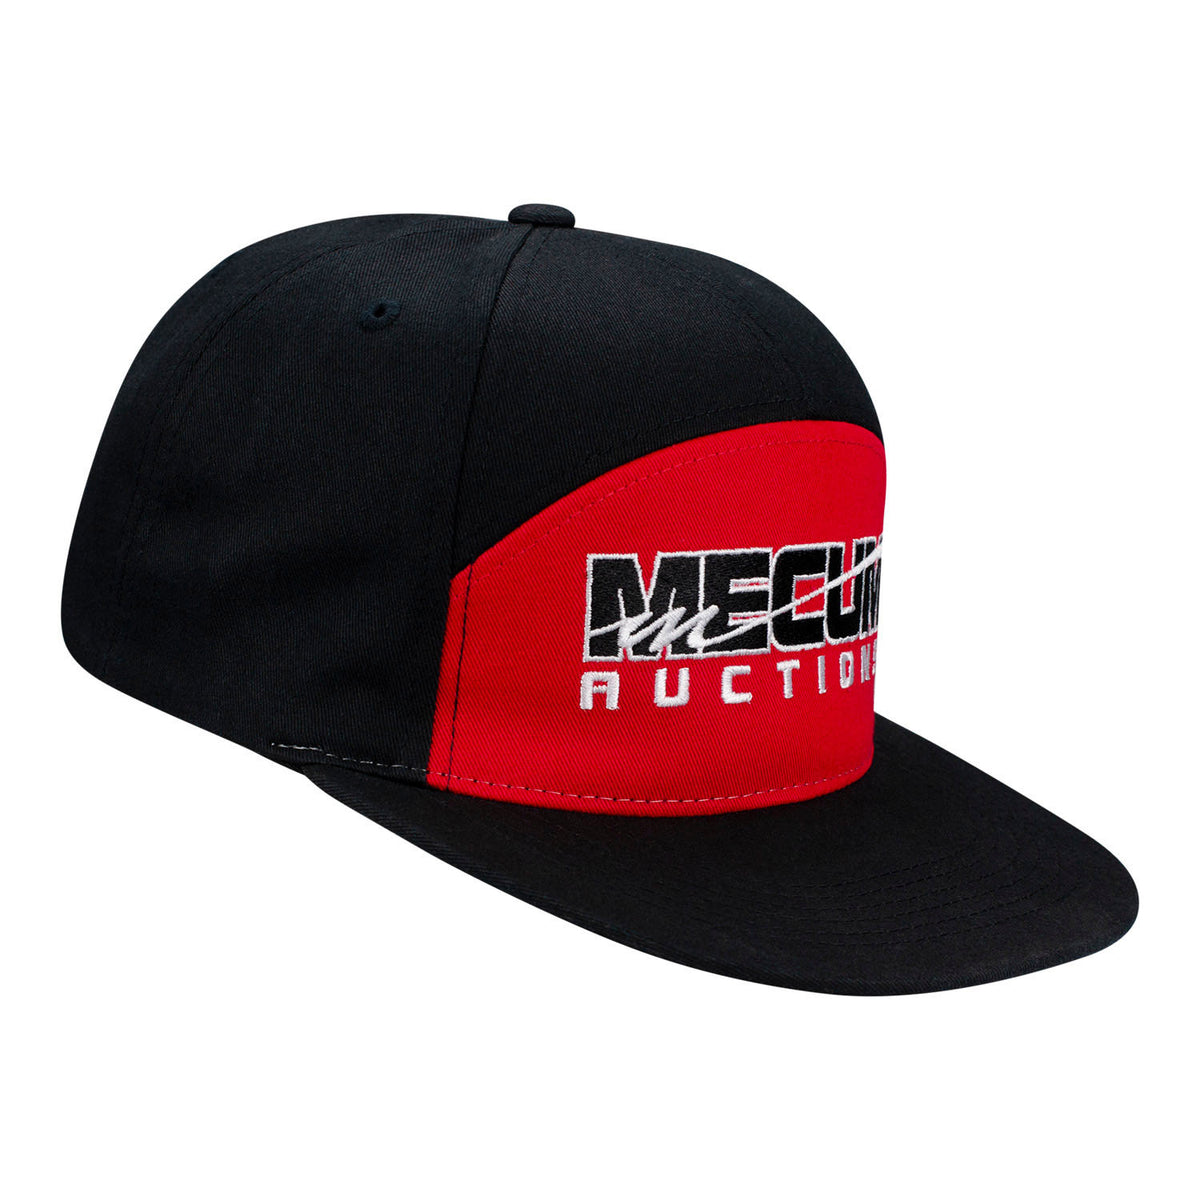 Primary Logo Red/Black Snapback - Front Right Side View